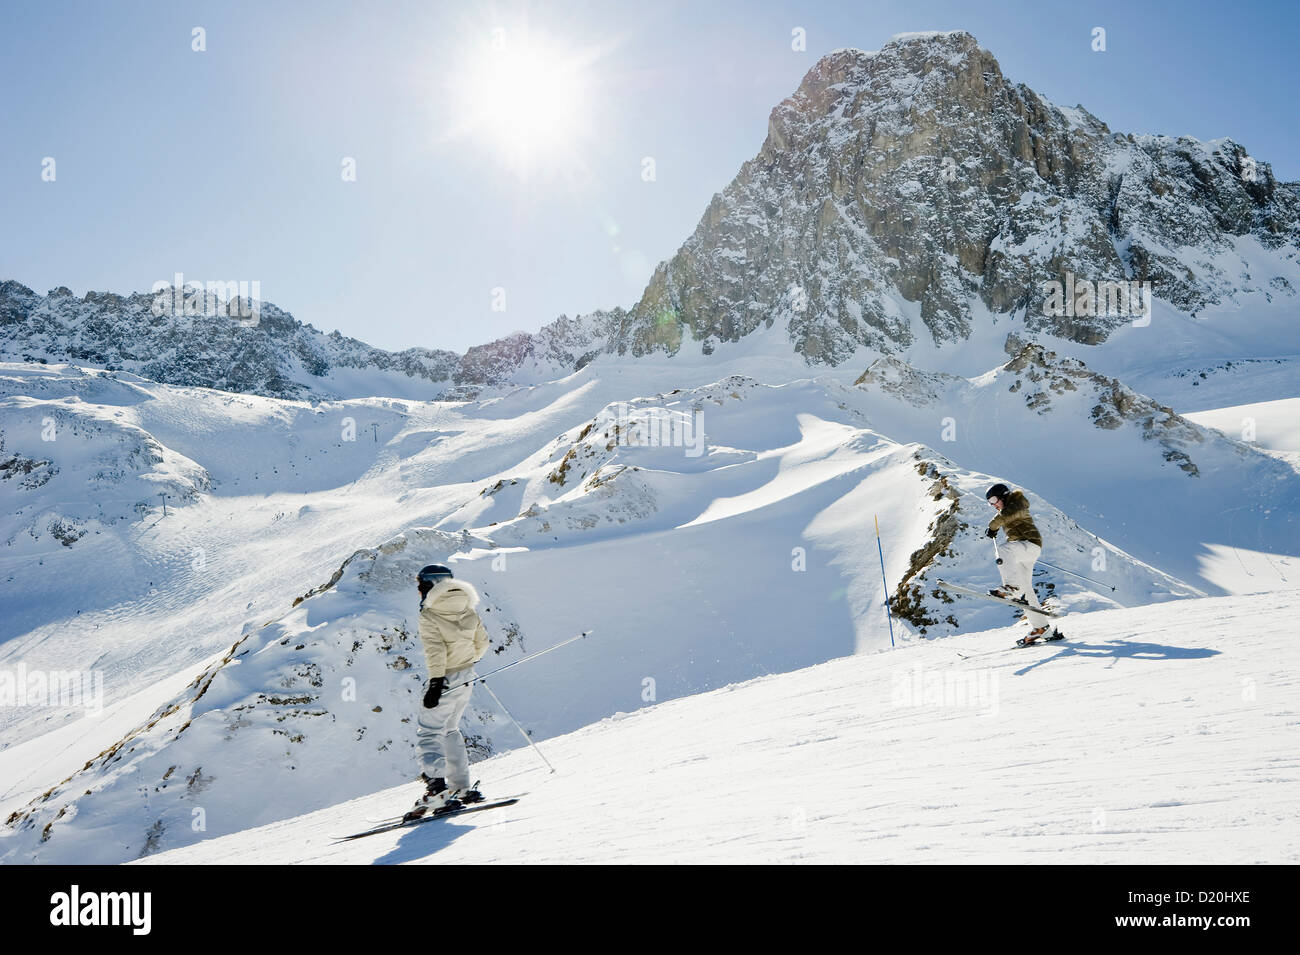 Two skiers, Snow-capped mountains, Tignes, Val d Isere, Savoie department, Rhone-Alpes, France Stock Photo